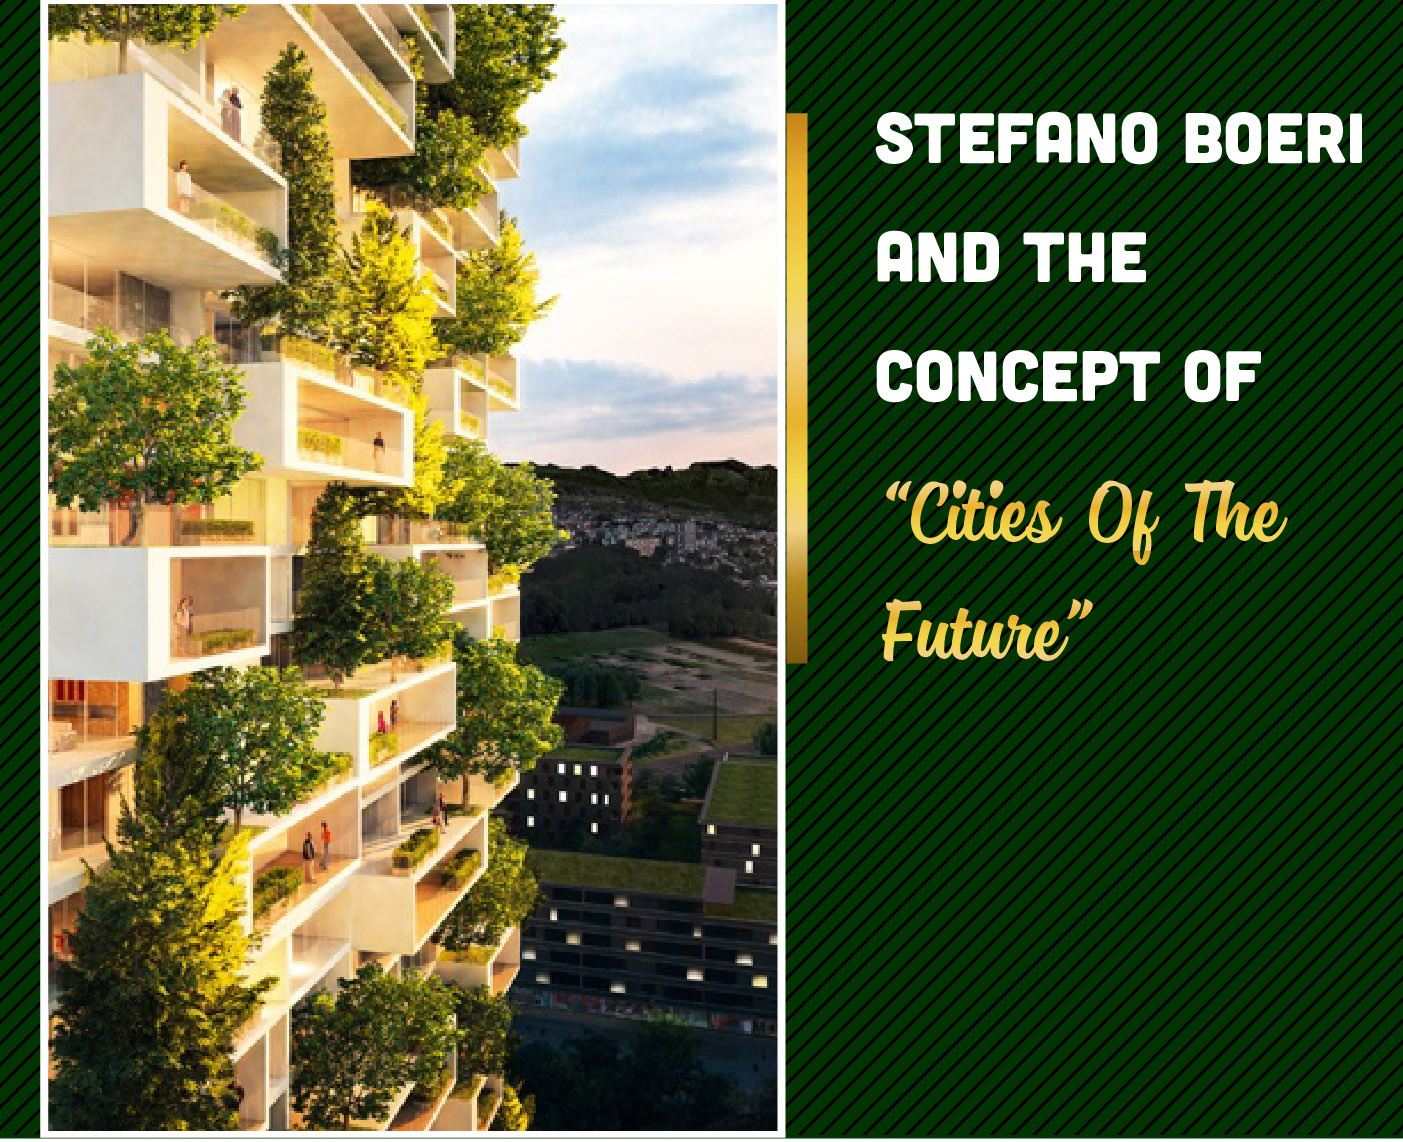 STEFANO BOERI AND THE CONCEPT OF “CITIES OF THE FUTURE”